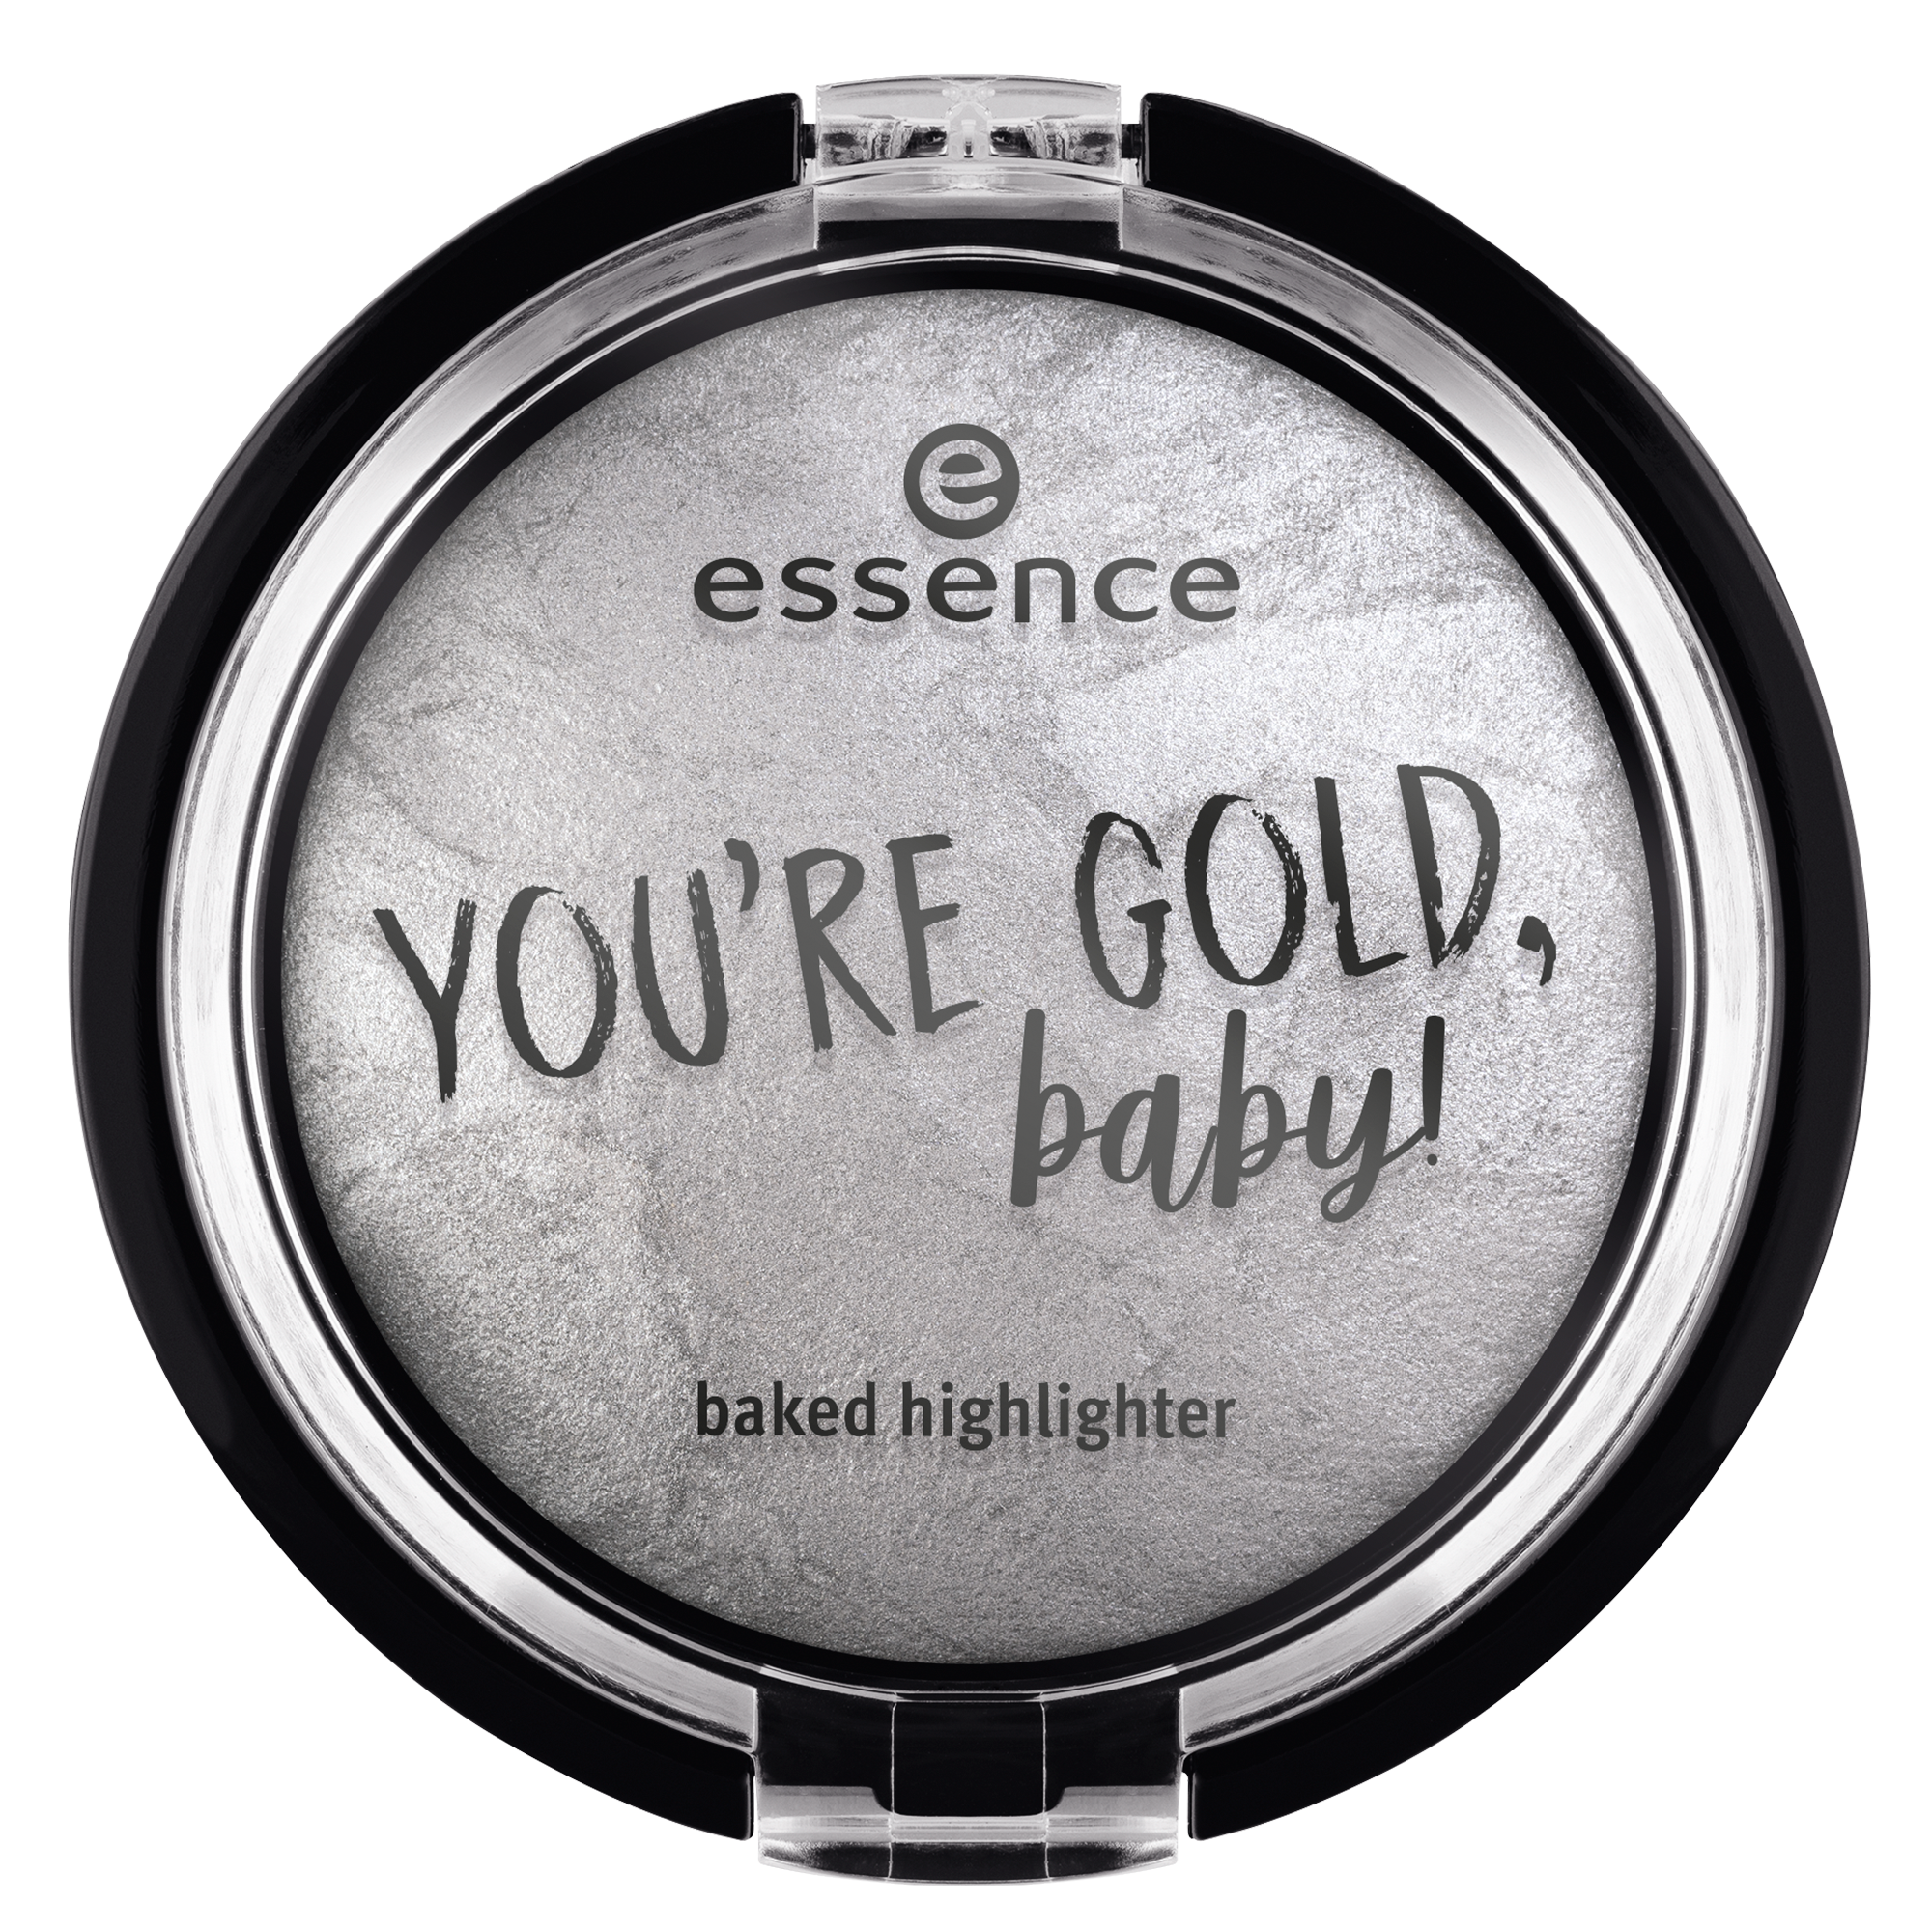 YOU'RE GOLD, baby! baked highlighter